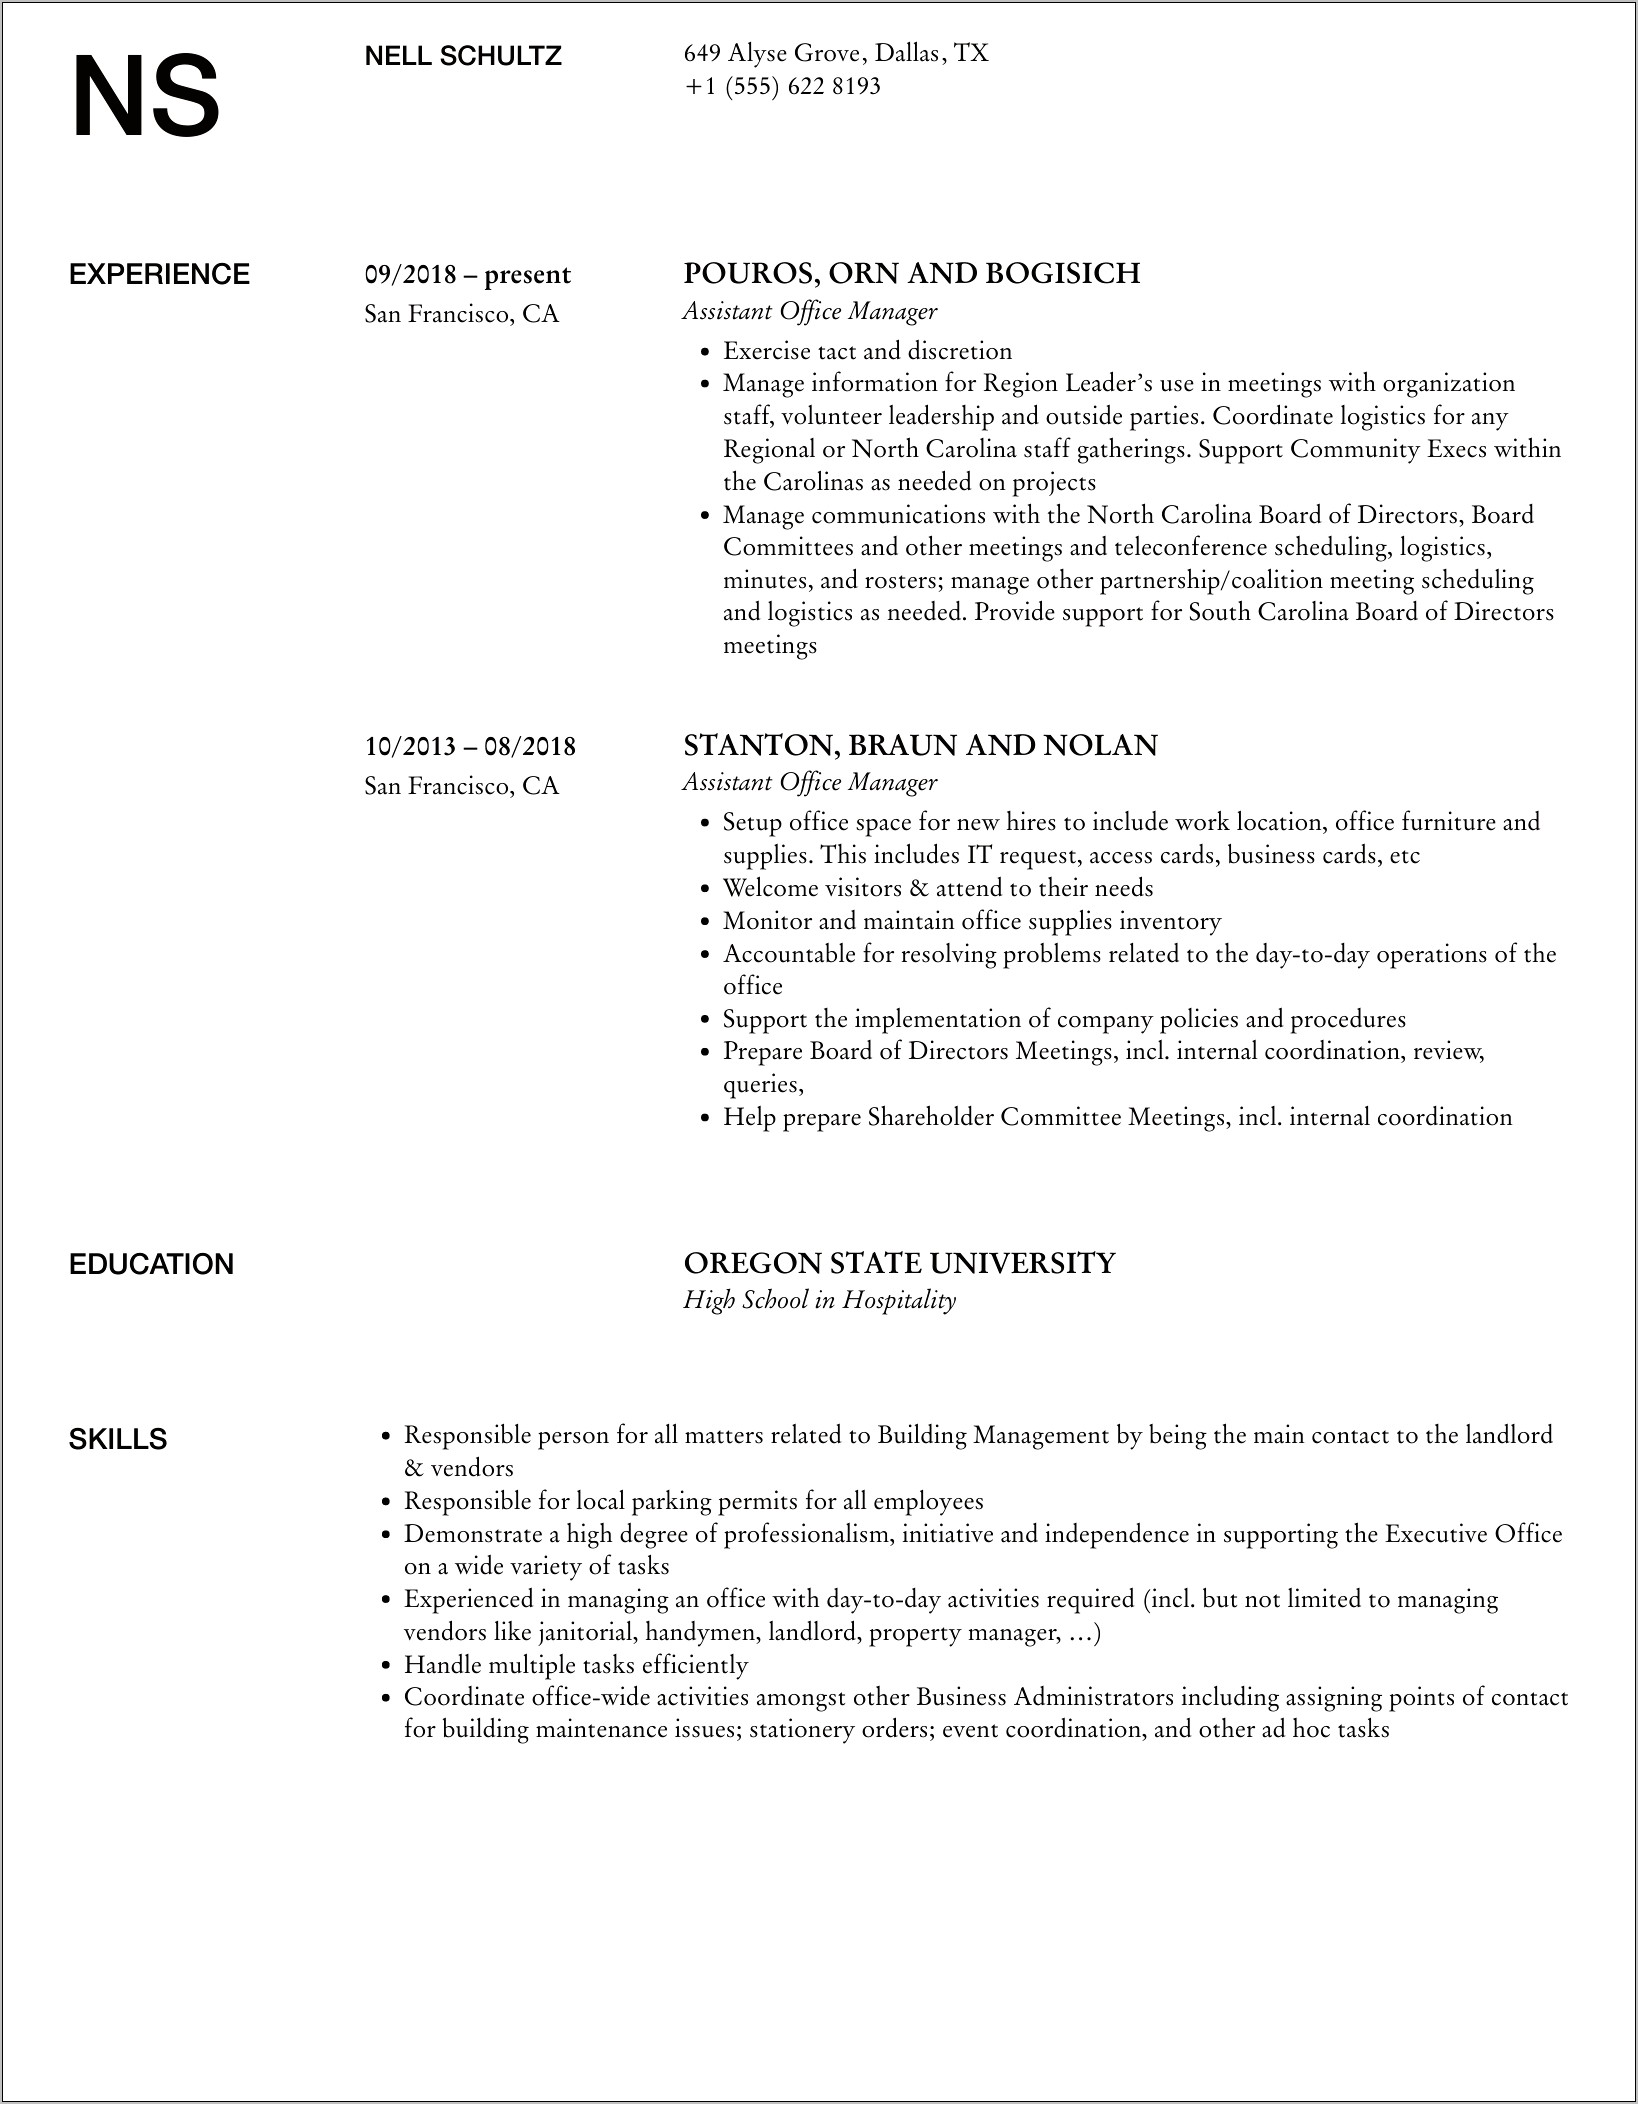 Legal Assistant Office Manager Resume